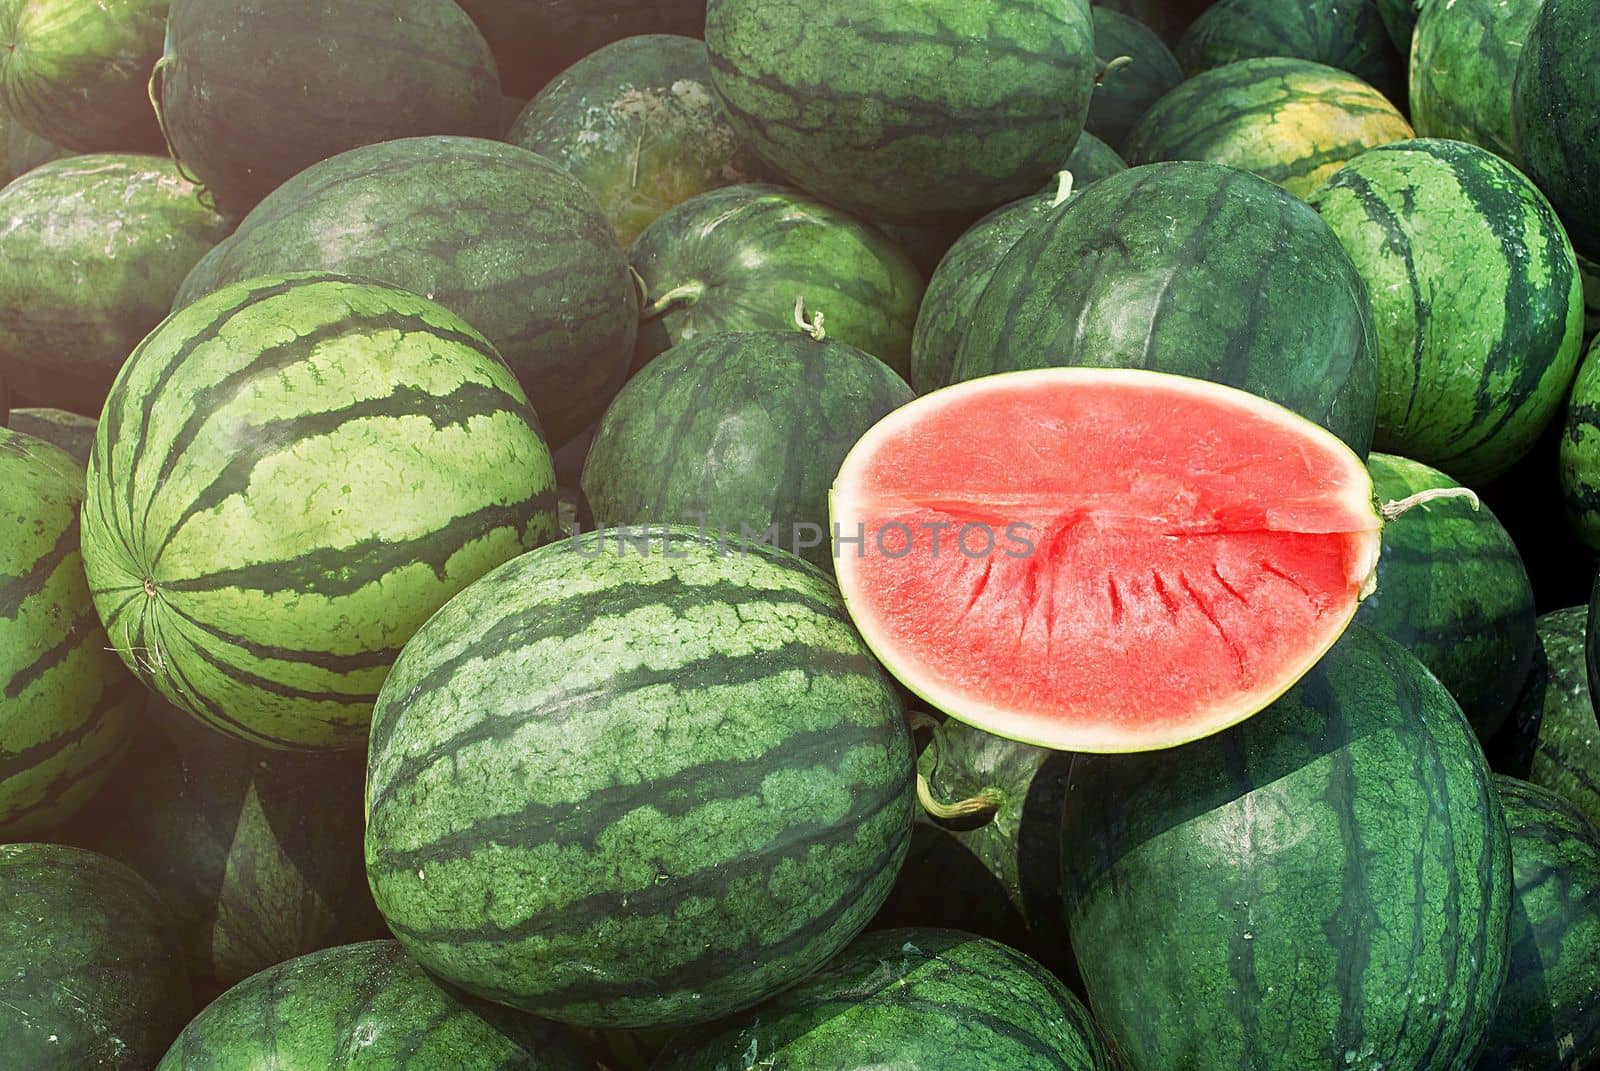 Many big sweet green watermelons and one cut watermelon